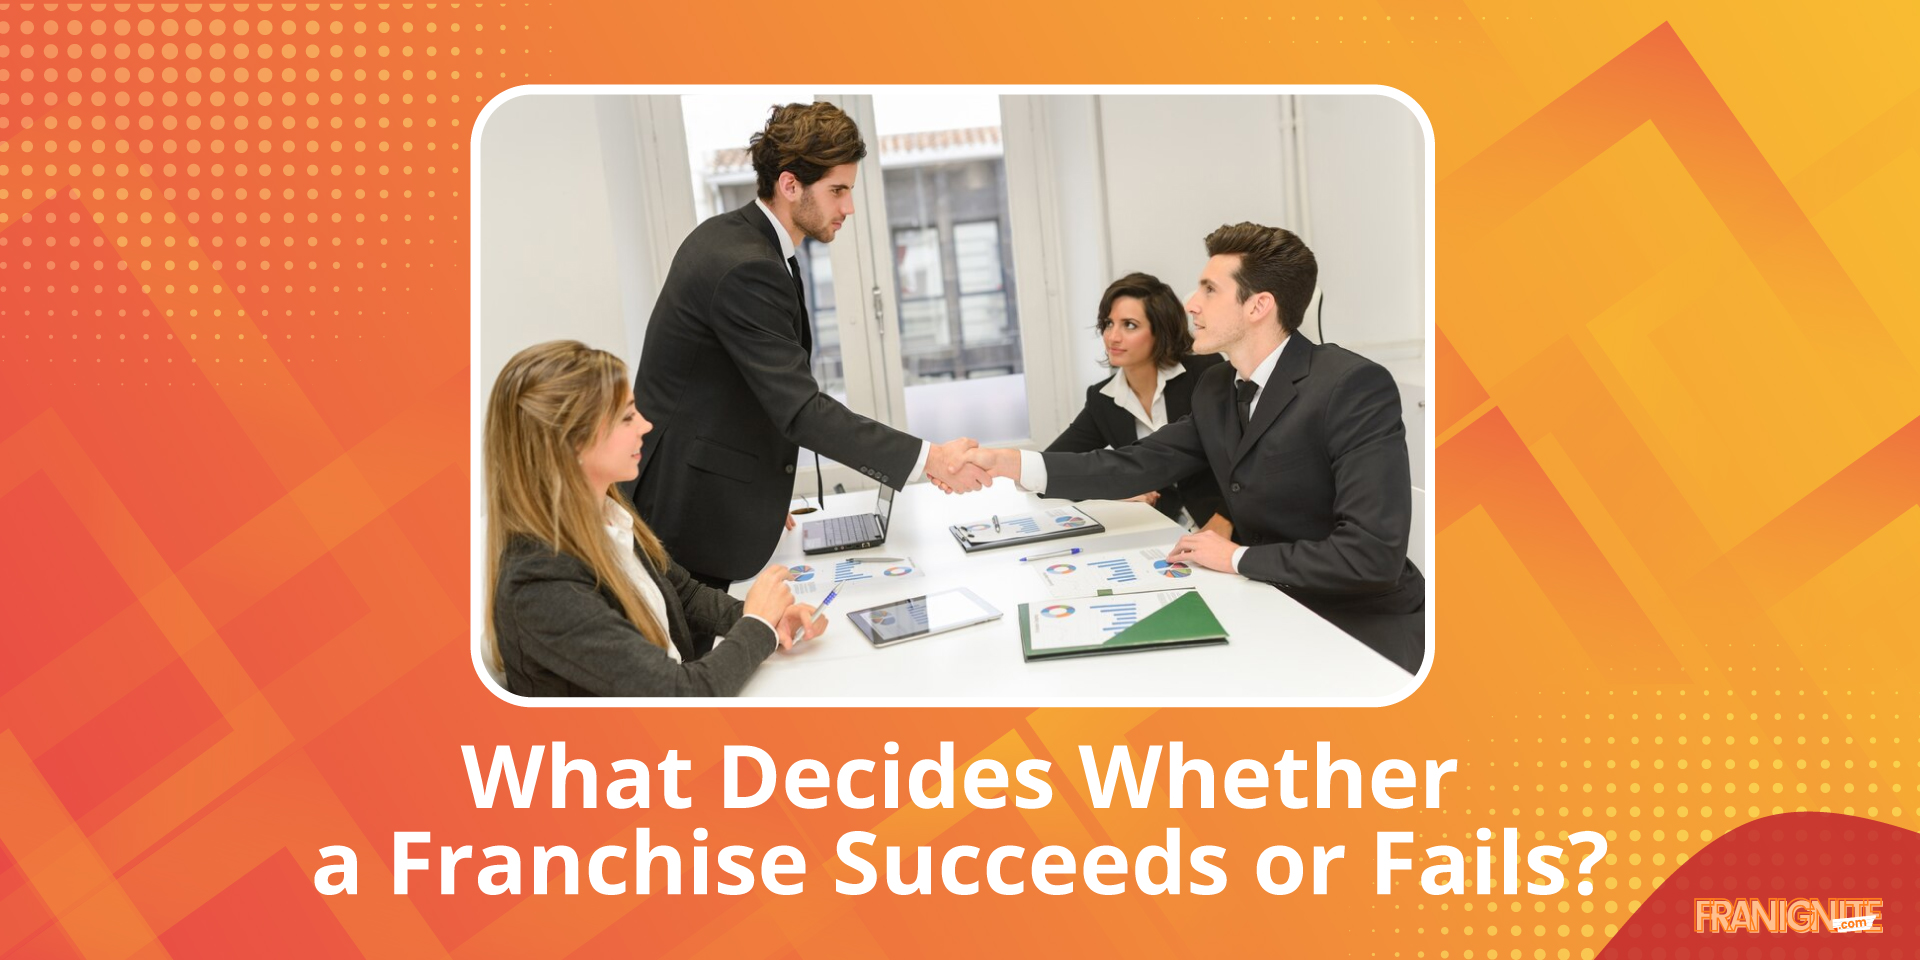 What Decides Whether a Franchise Succeeds or Fails?